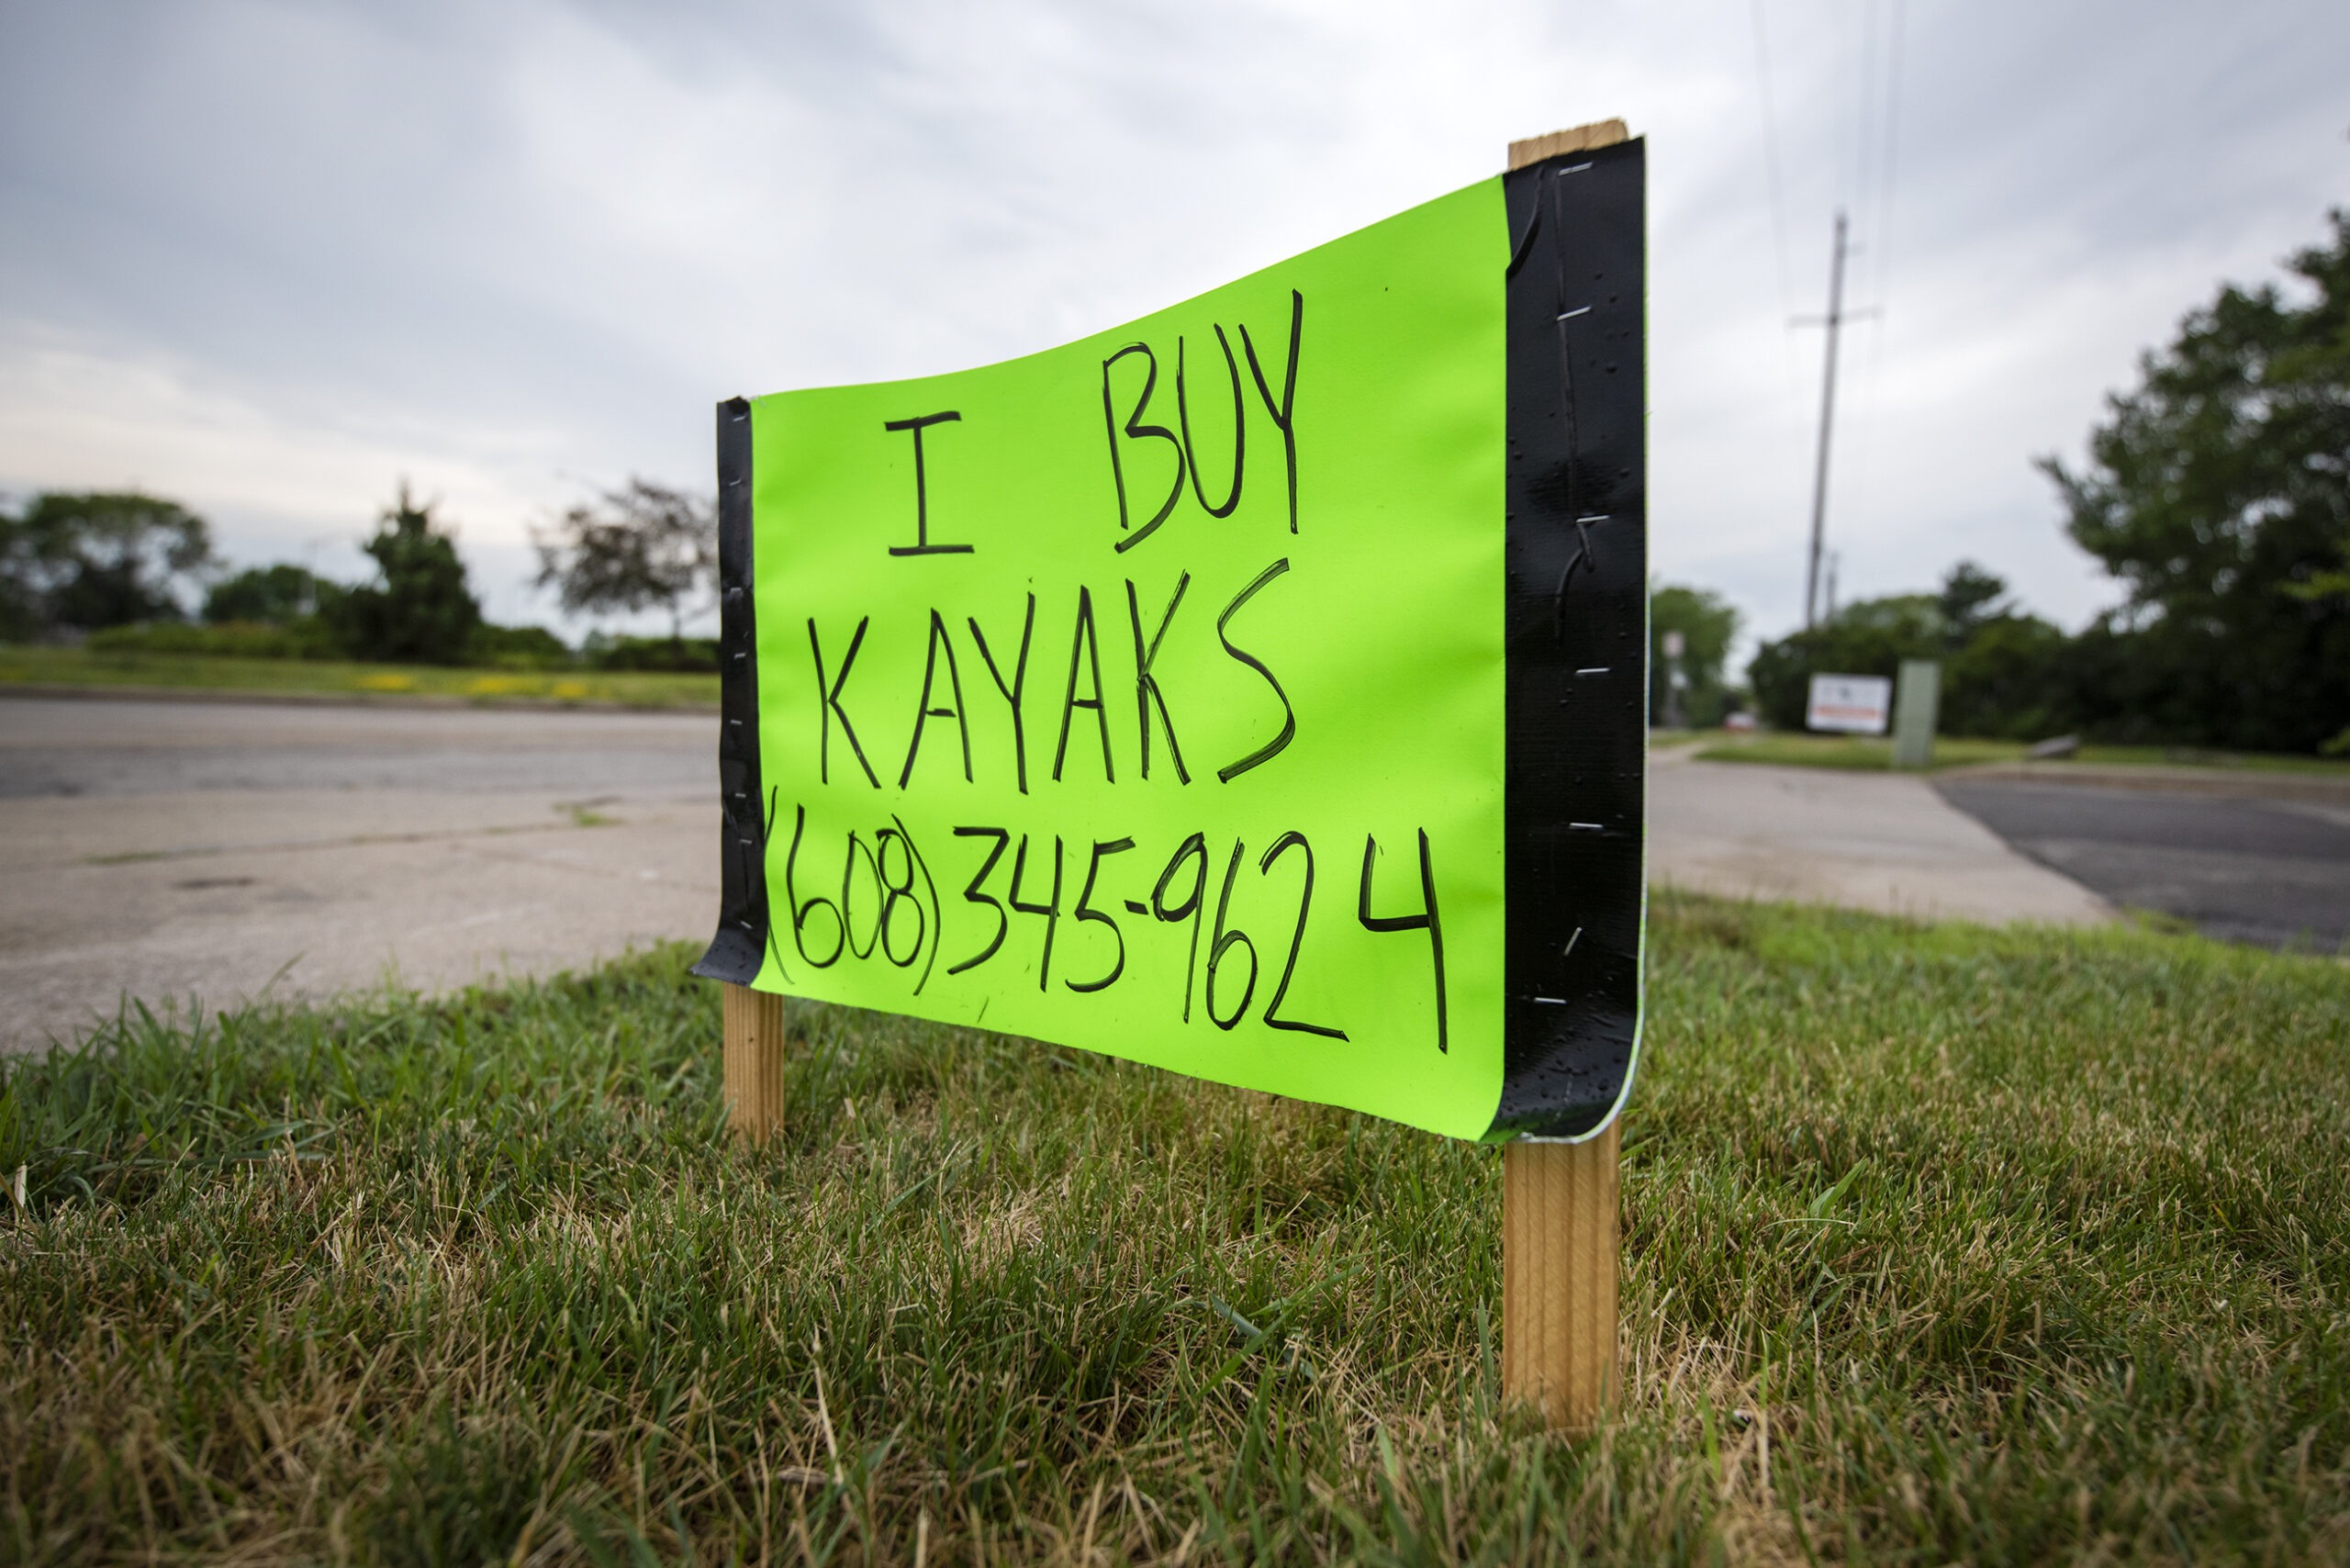 A green handmade sign says "I buy kayaks," followed by a phone number.